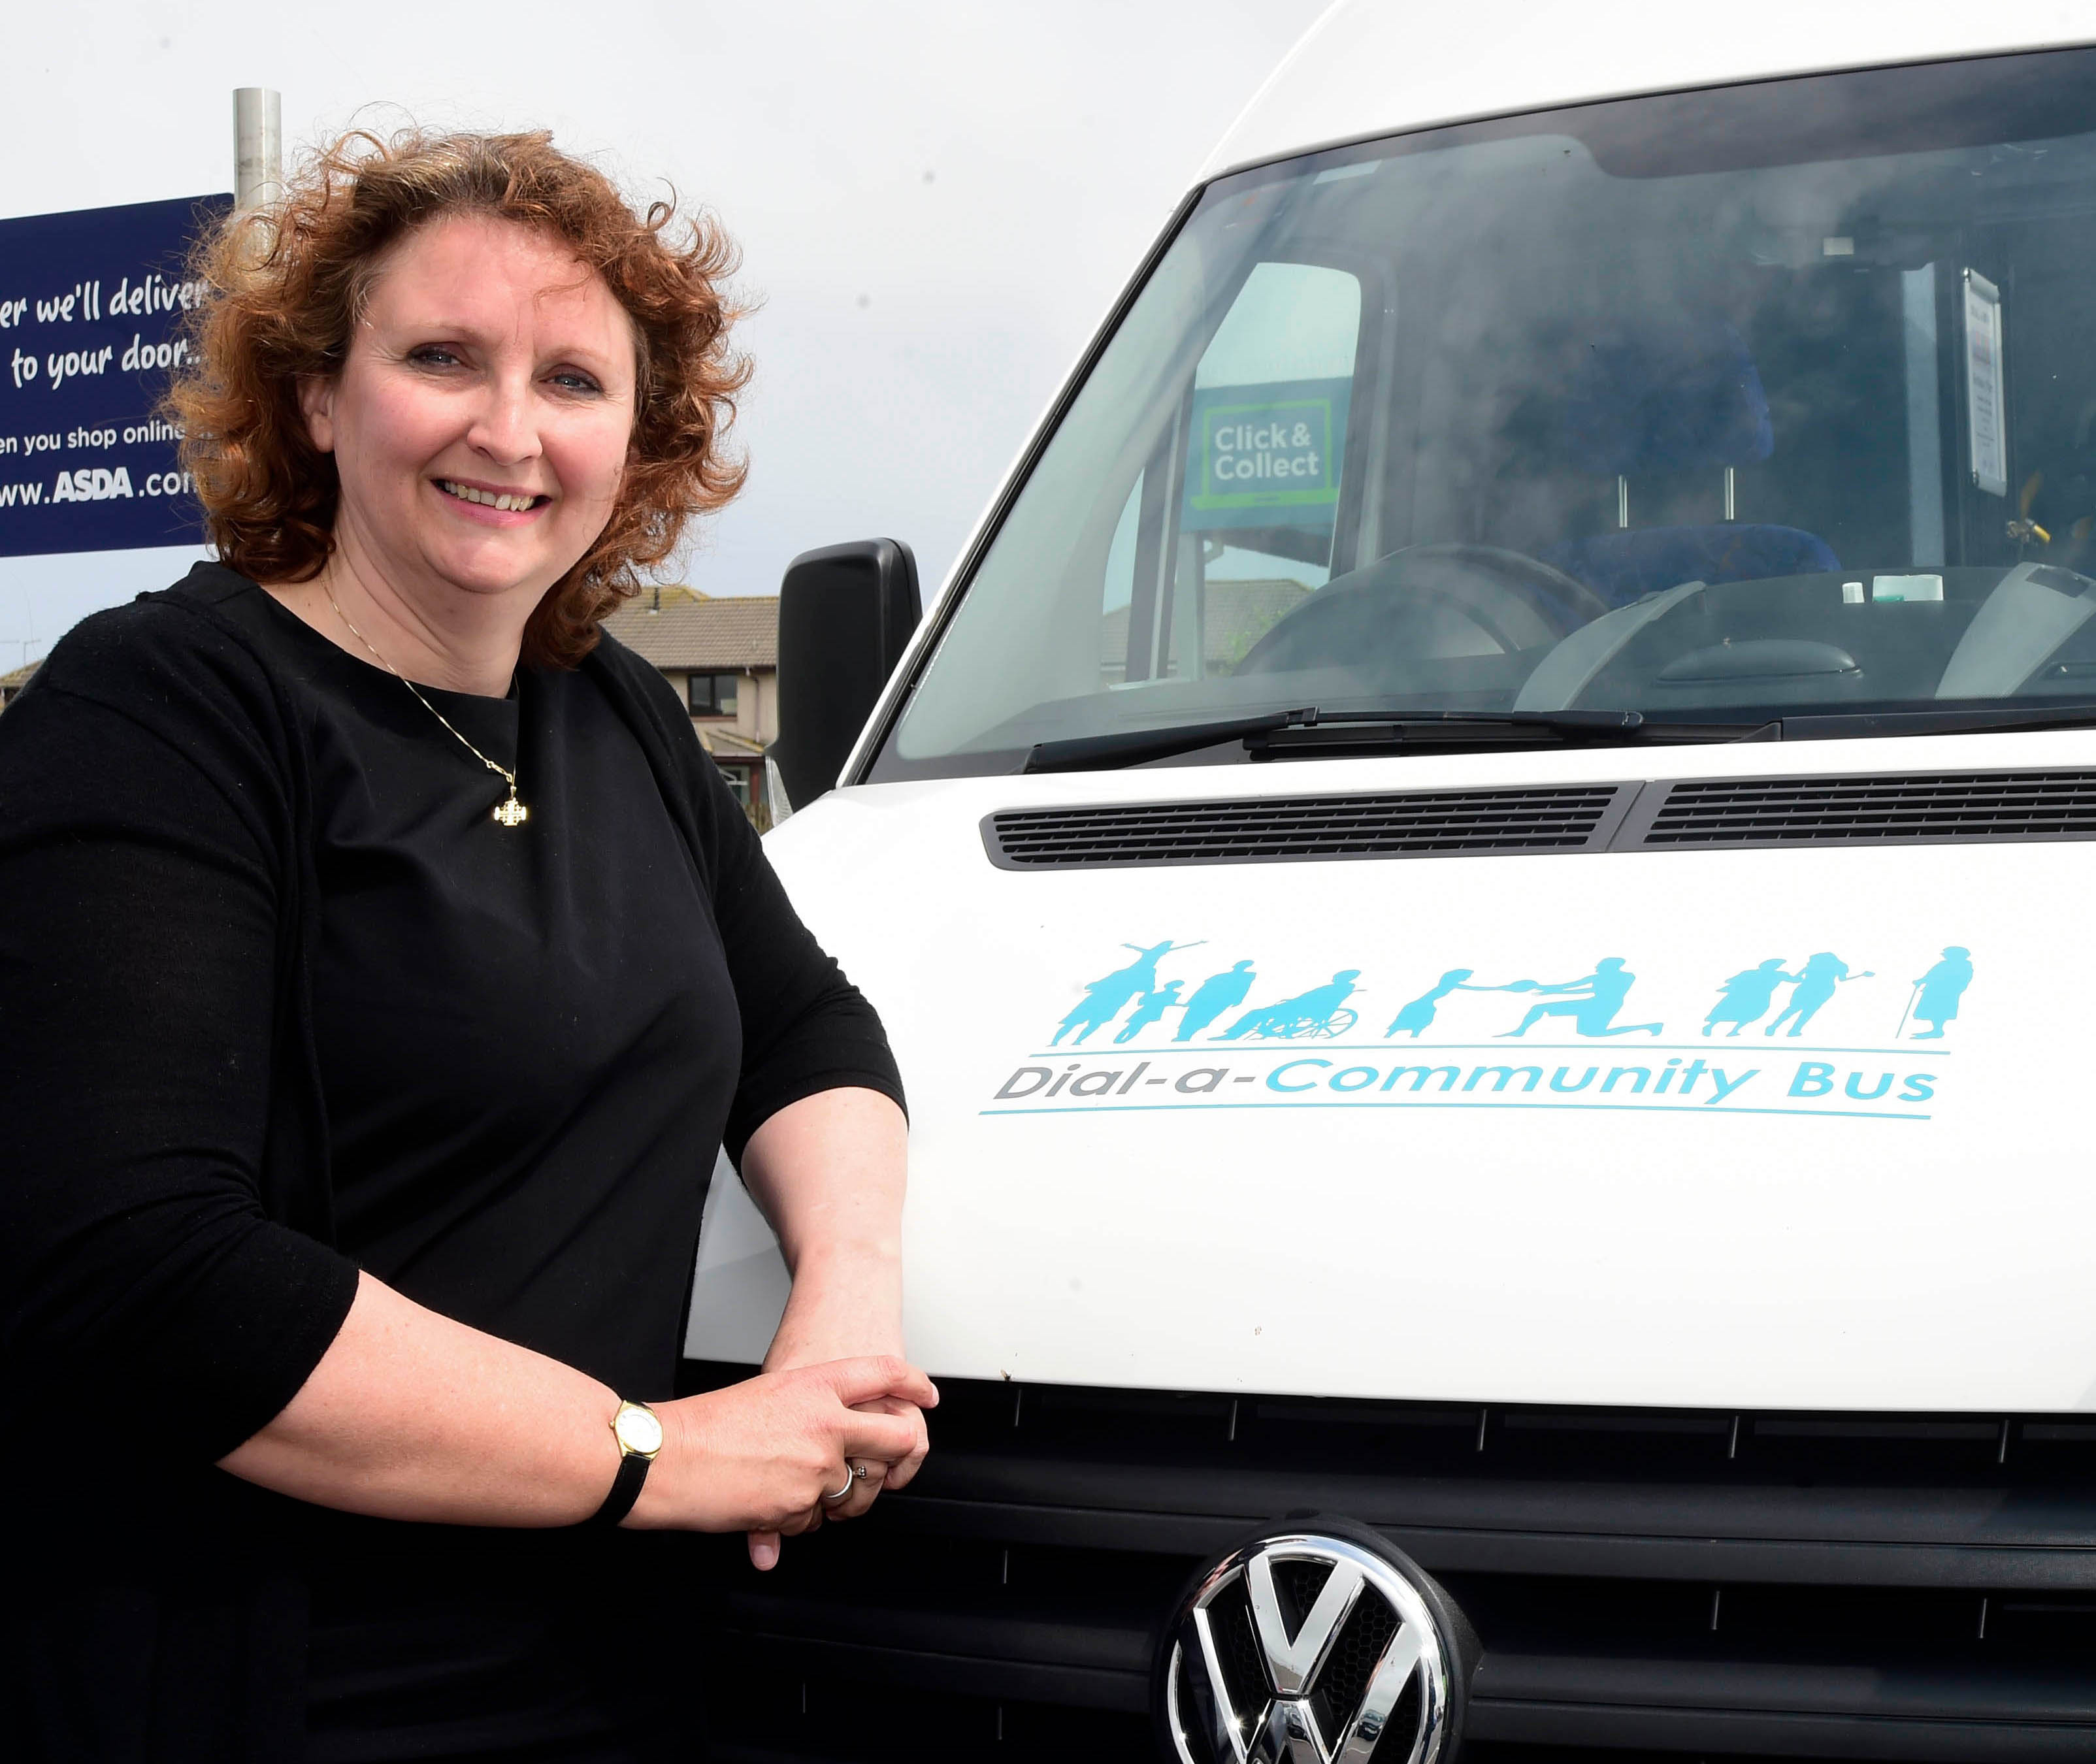 Rachel Milne during her time at Buchan Dial-a-Bus